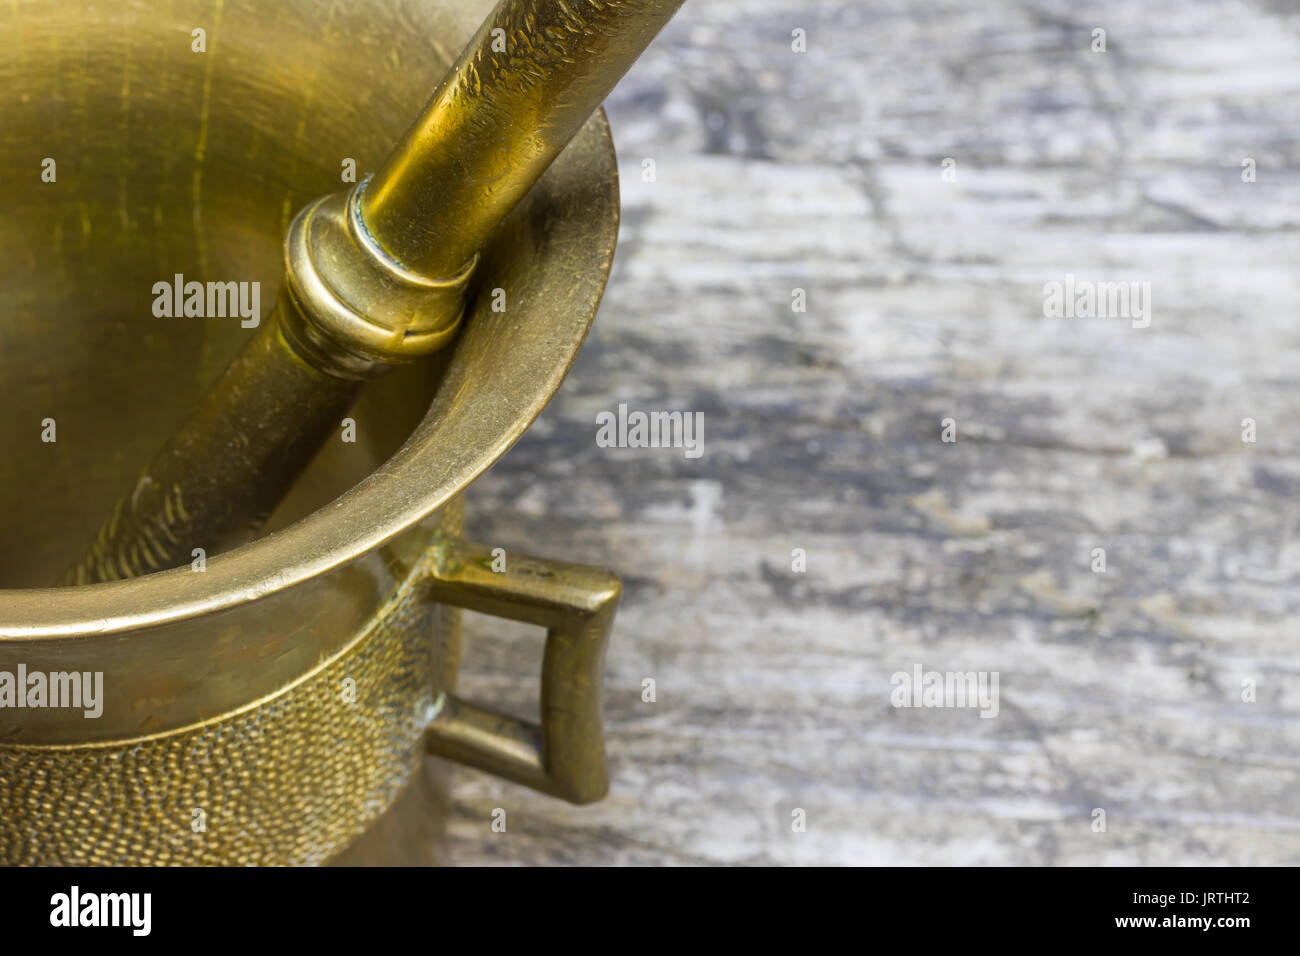 Closeup view of the vintage mortar brass standing on the old wooden desk. Free place for your text is on the right side of the photo. Stock Photo